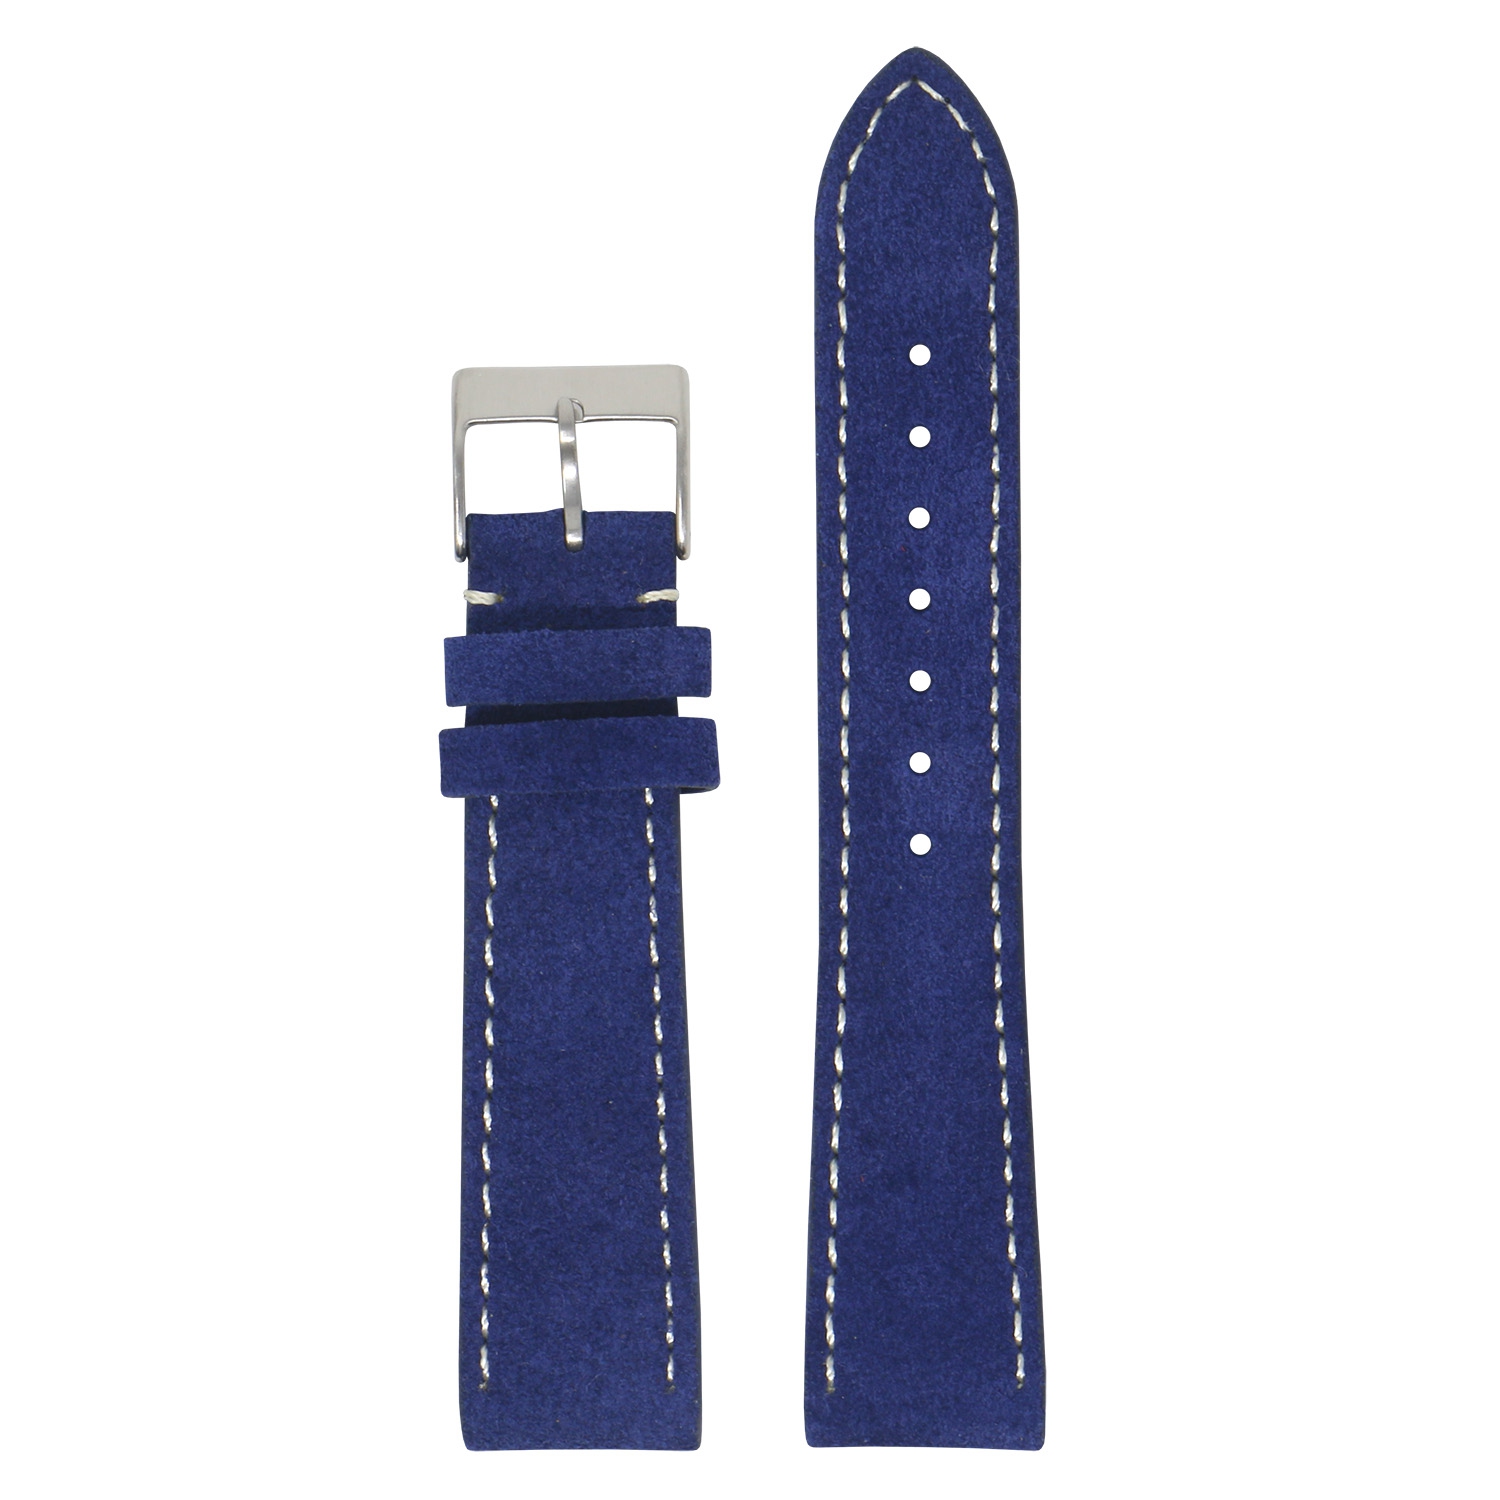 StrapsCo Classic Suede Watch Band Strap (Short, Standard, Long) for Fitbit Charge 4 & Charge 3 - Short - Blue